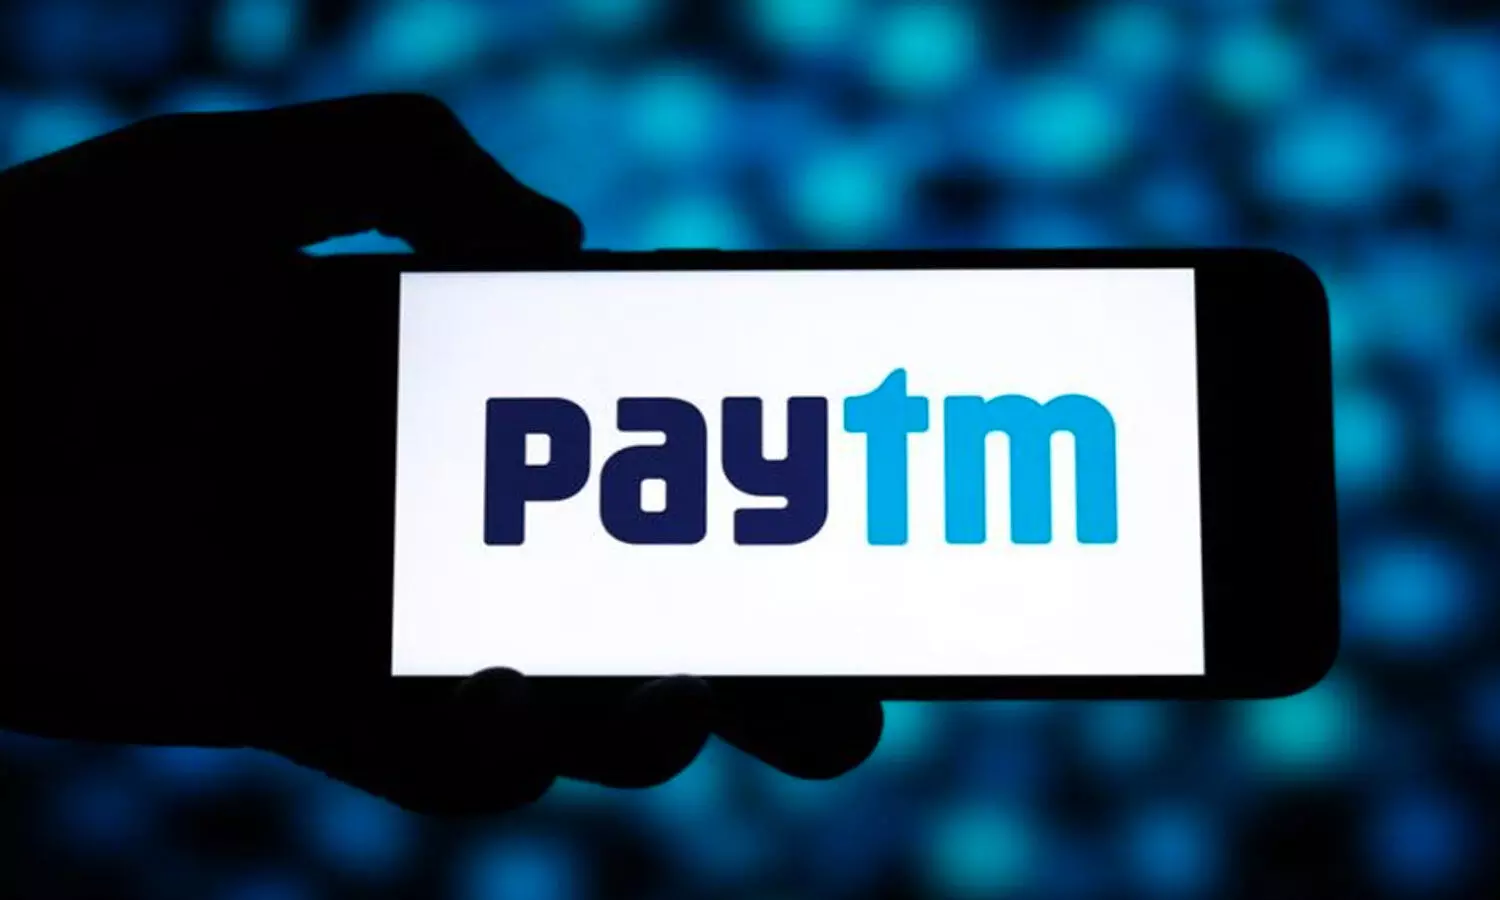 Paytm merchant support and uninterrupted services: Uninterrupted Paytm services for merchants announcement